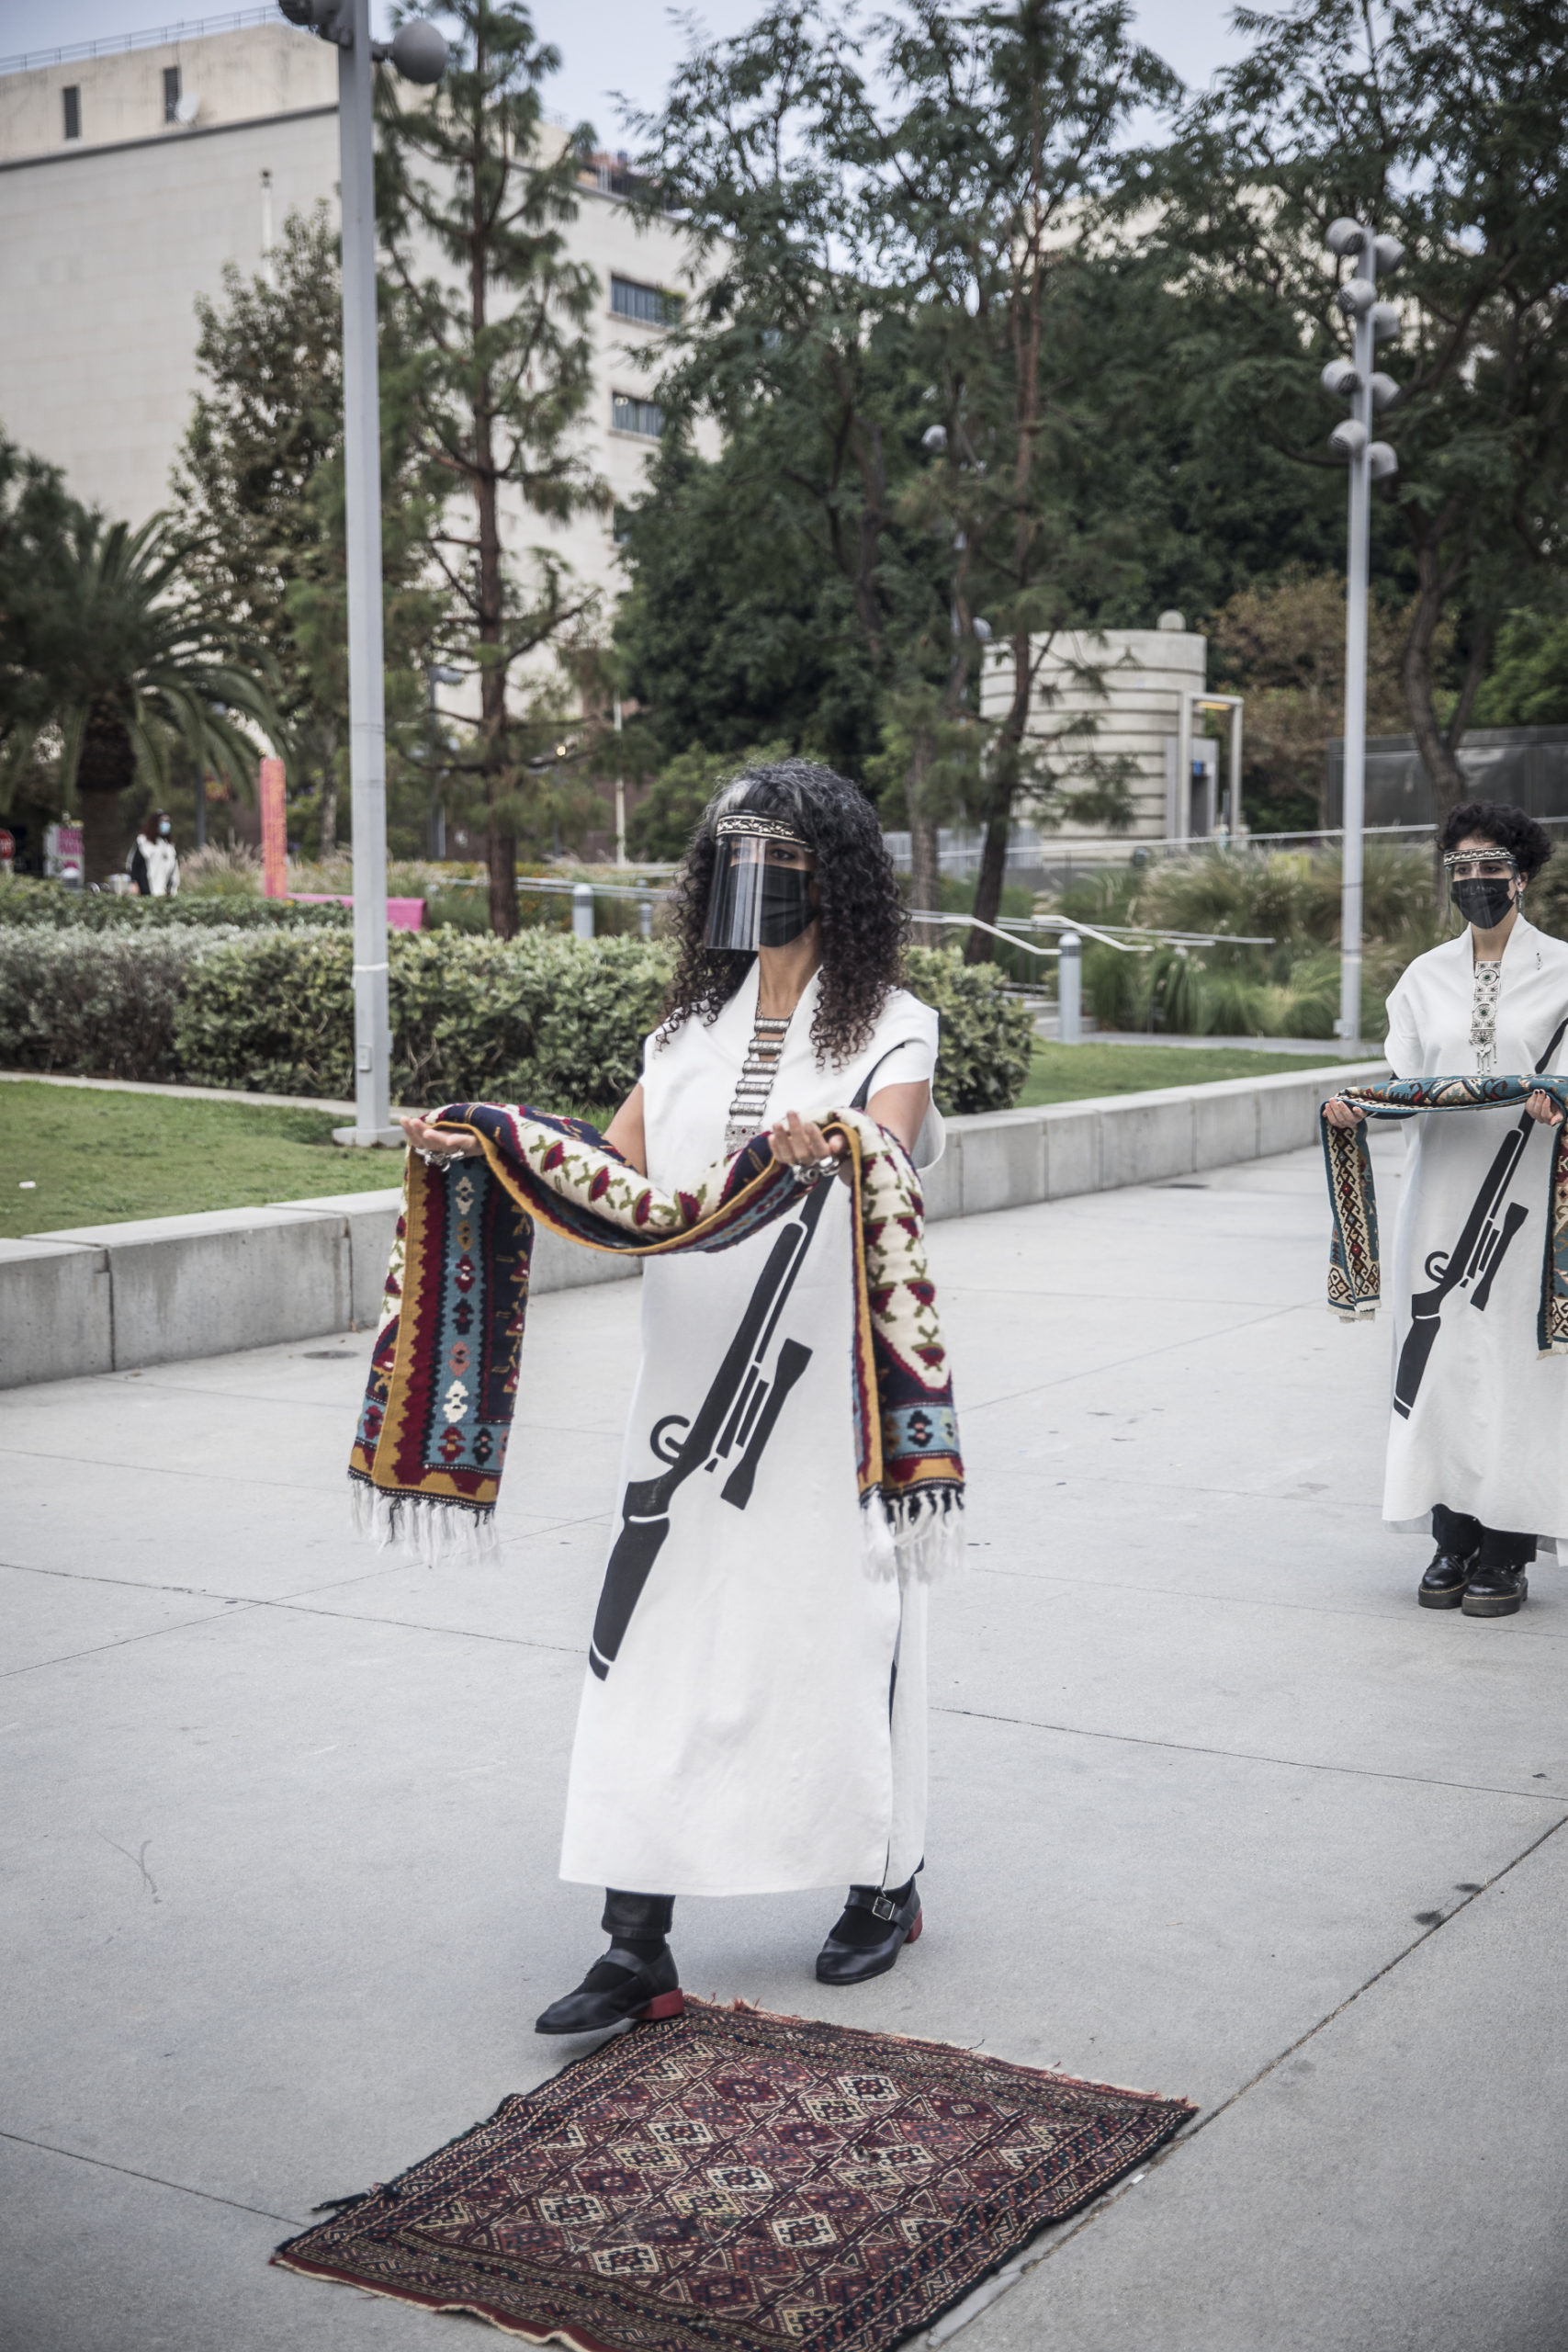 Two people walking carrying small rugs in their outstretched hands, wearing white dresses with a graphic of a gun on them. A small rug is on the sidewalk.